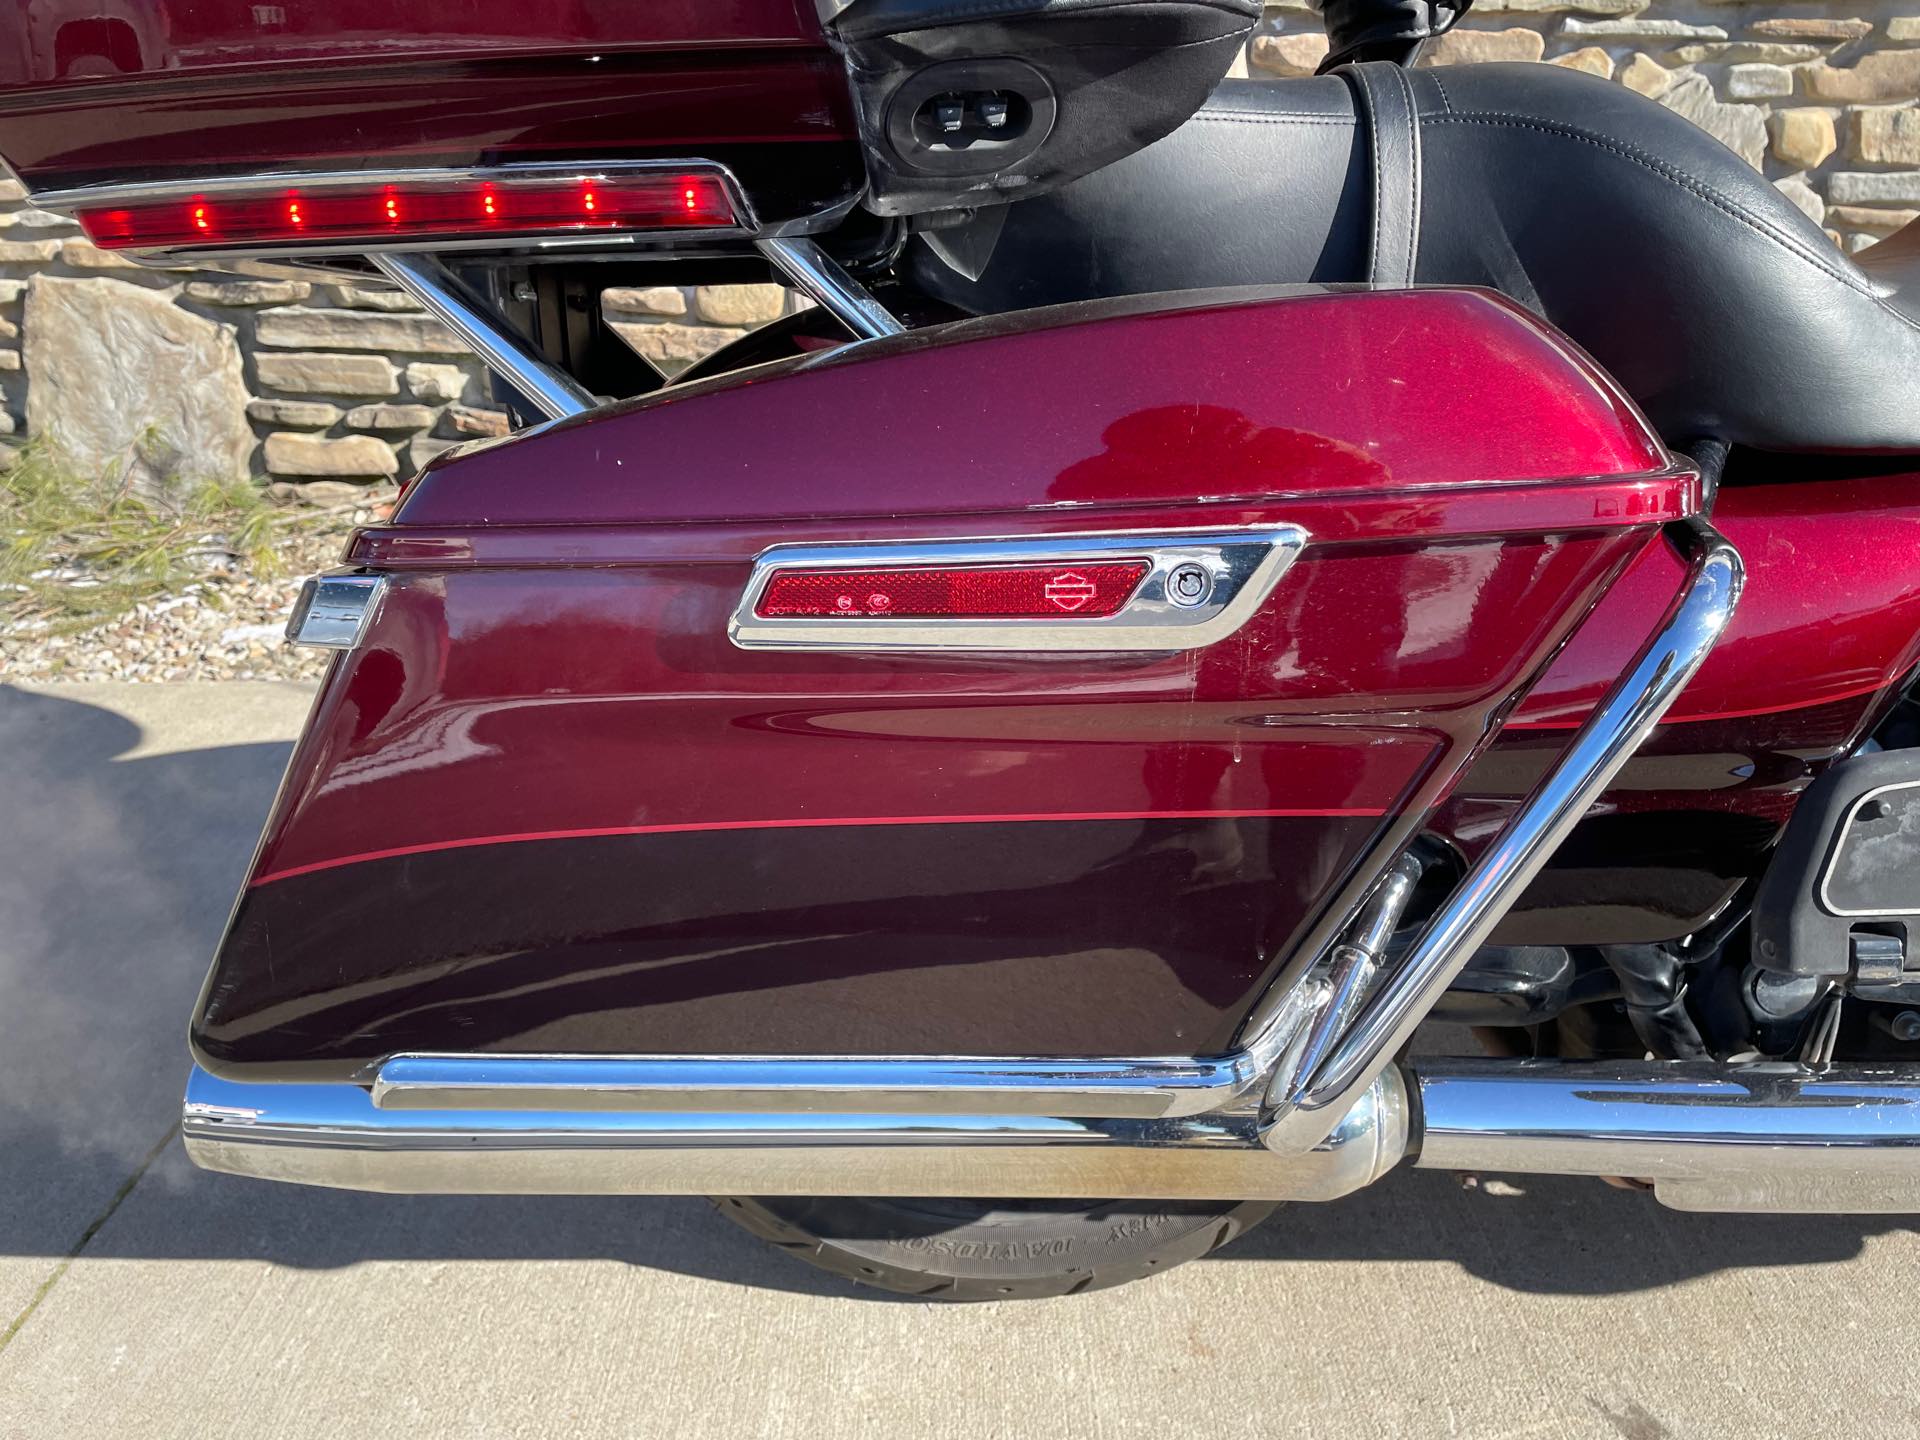 2015 Harley-Davidson Electra Glide Ultra Limited Low at Arkport Cycles